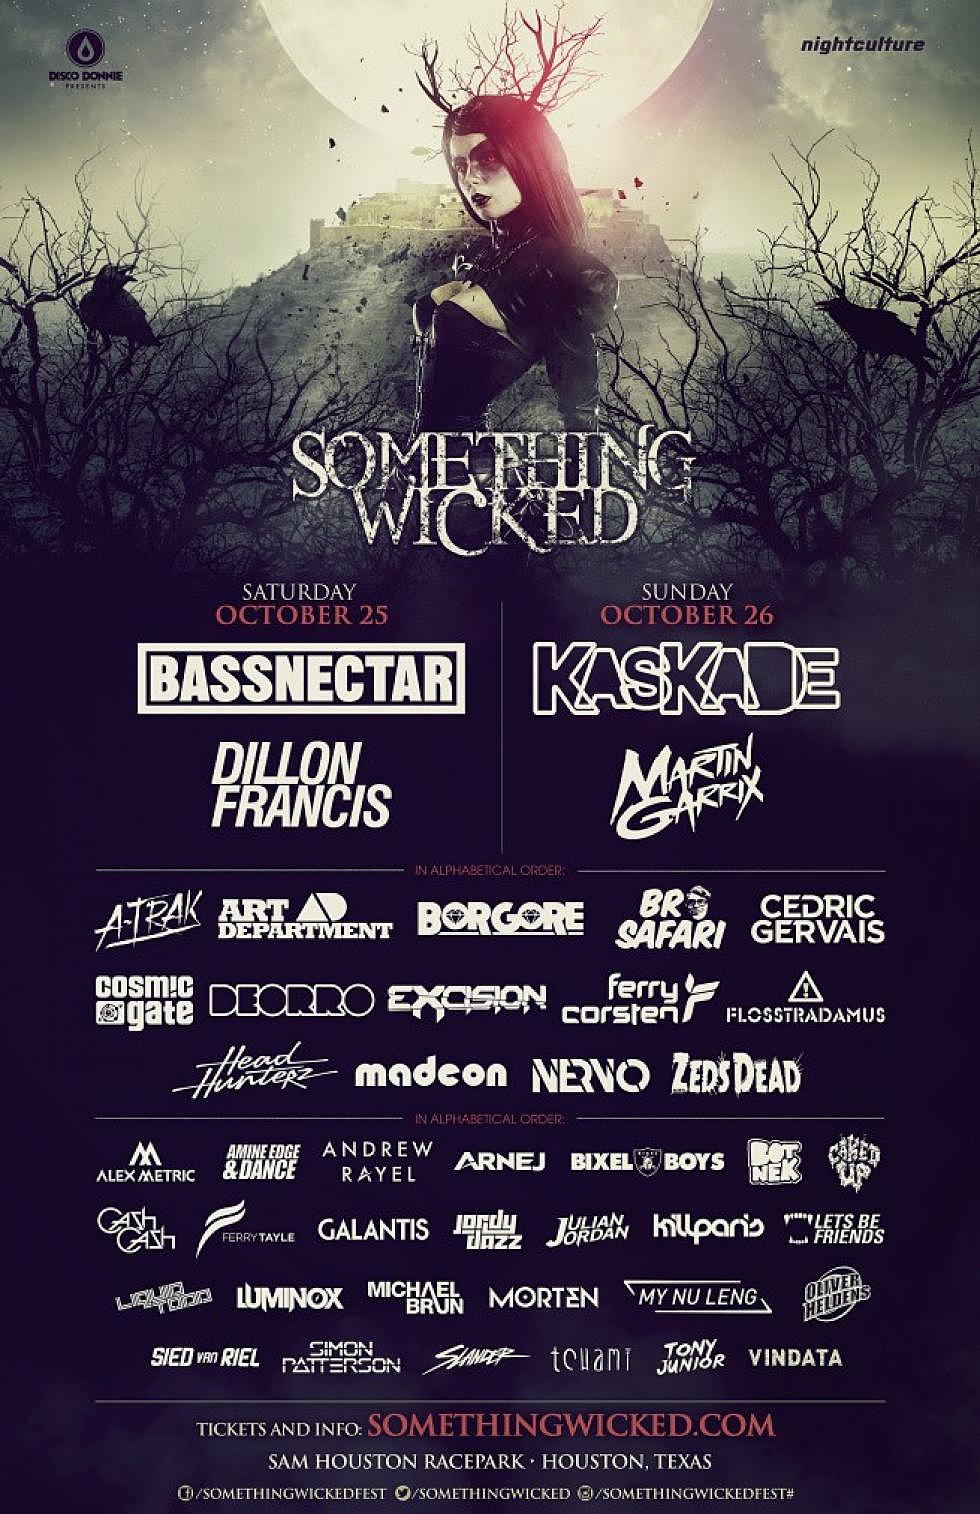 &#8216;Something Wicked&#8217; Announces 2014 Lineup w/ Bassnectar, Kaskade, Dillon Francis &#038; many more!